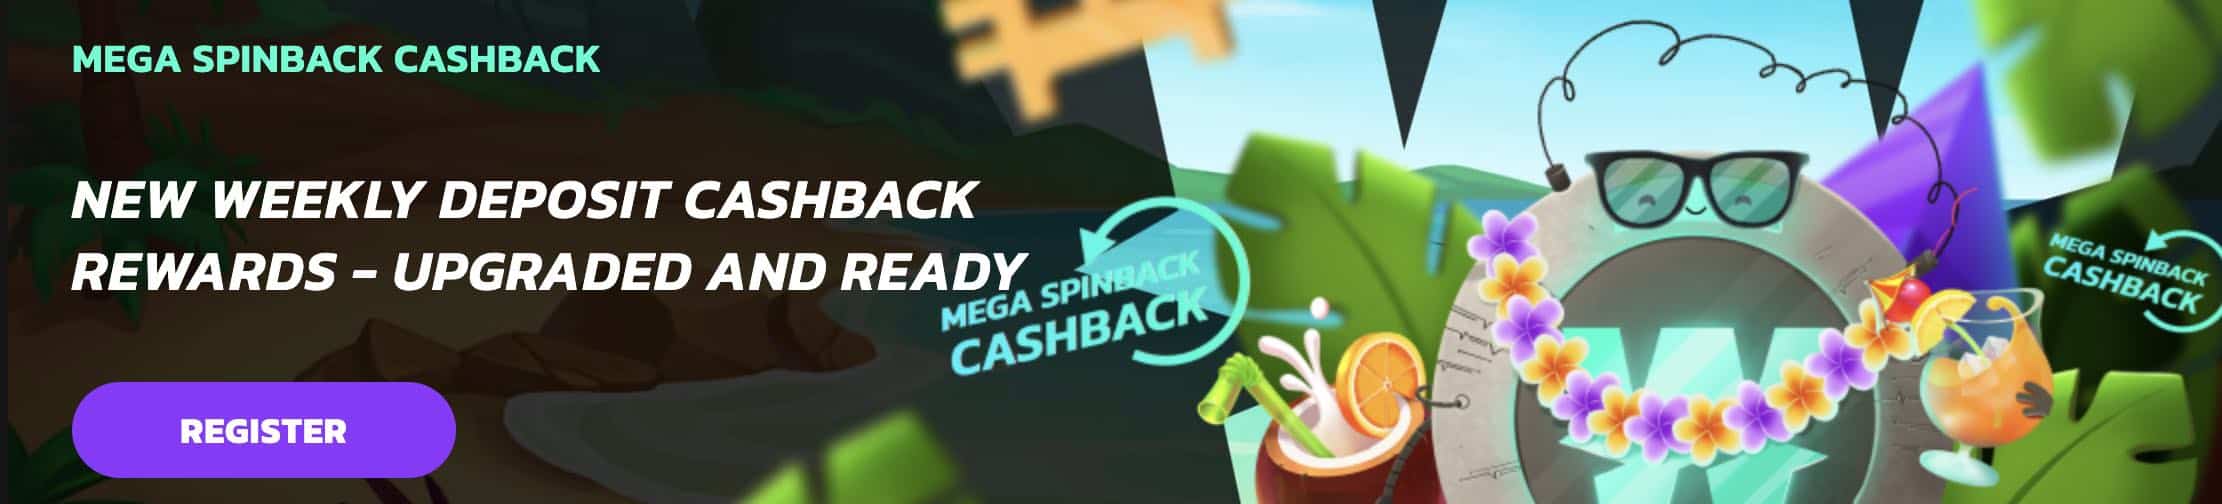 A screenshot of the banner ad on the Wildcoins homepage that advertises their Spinback Cashback offer